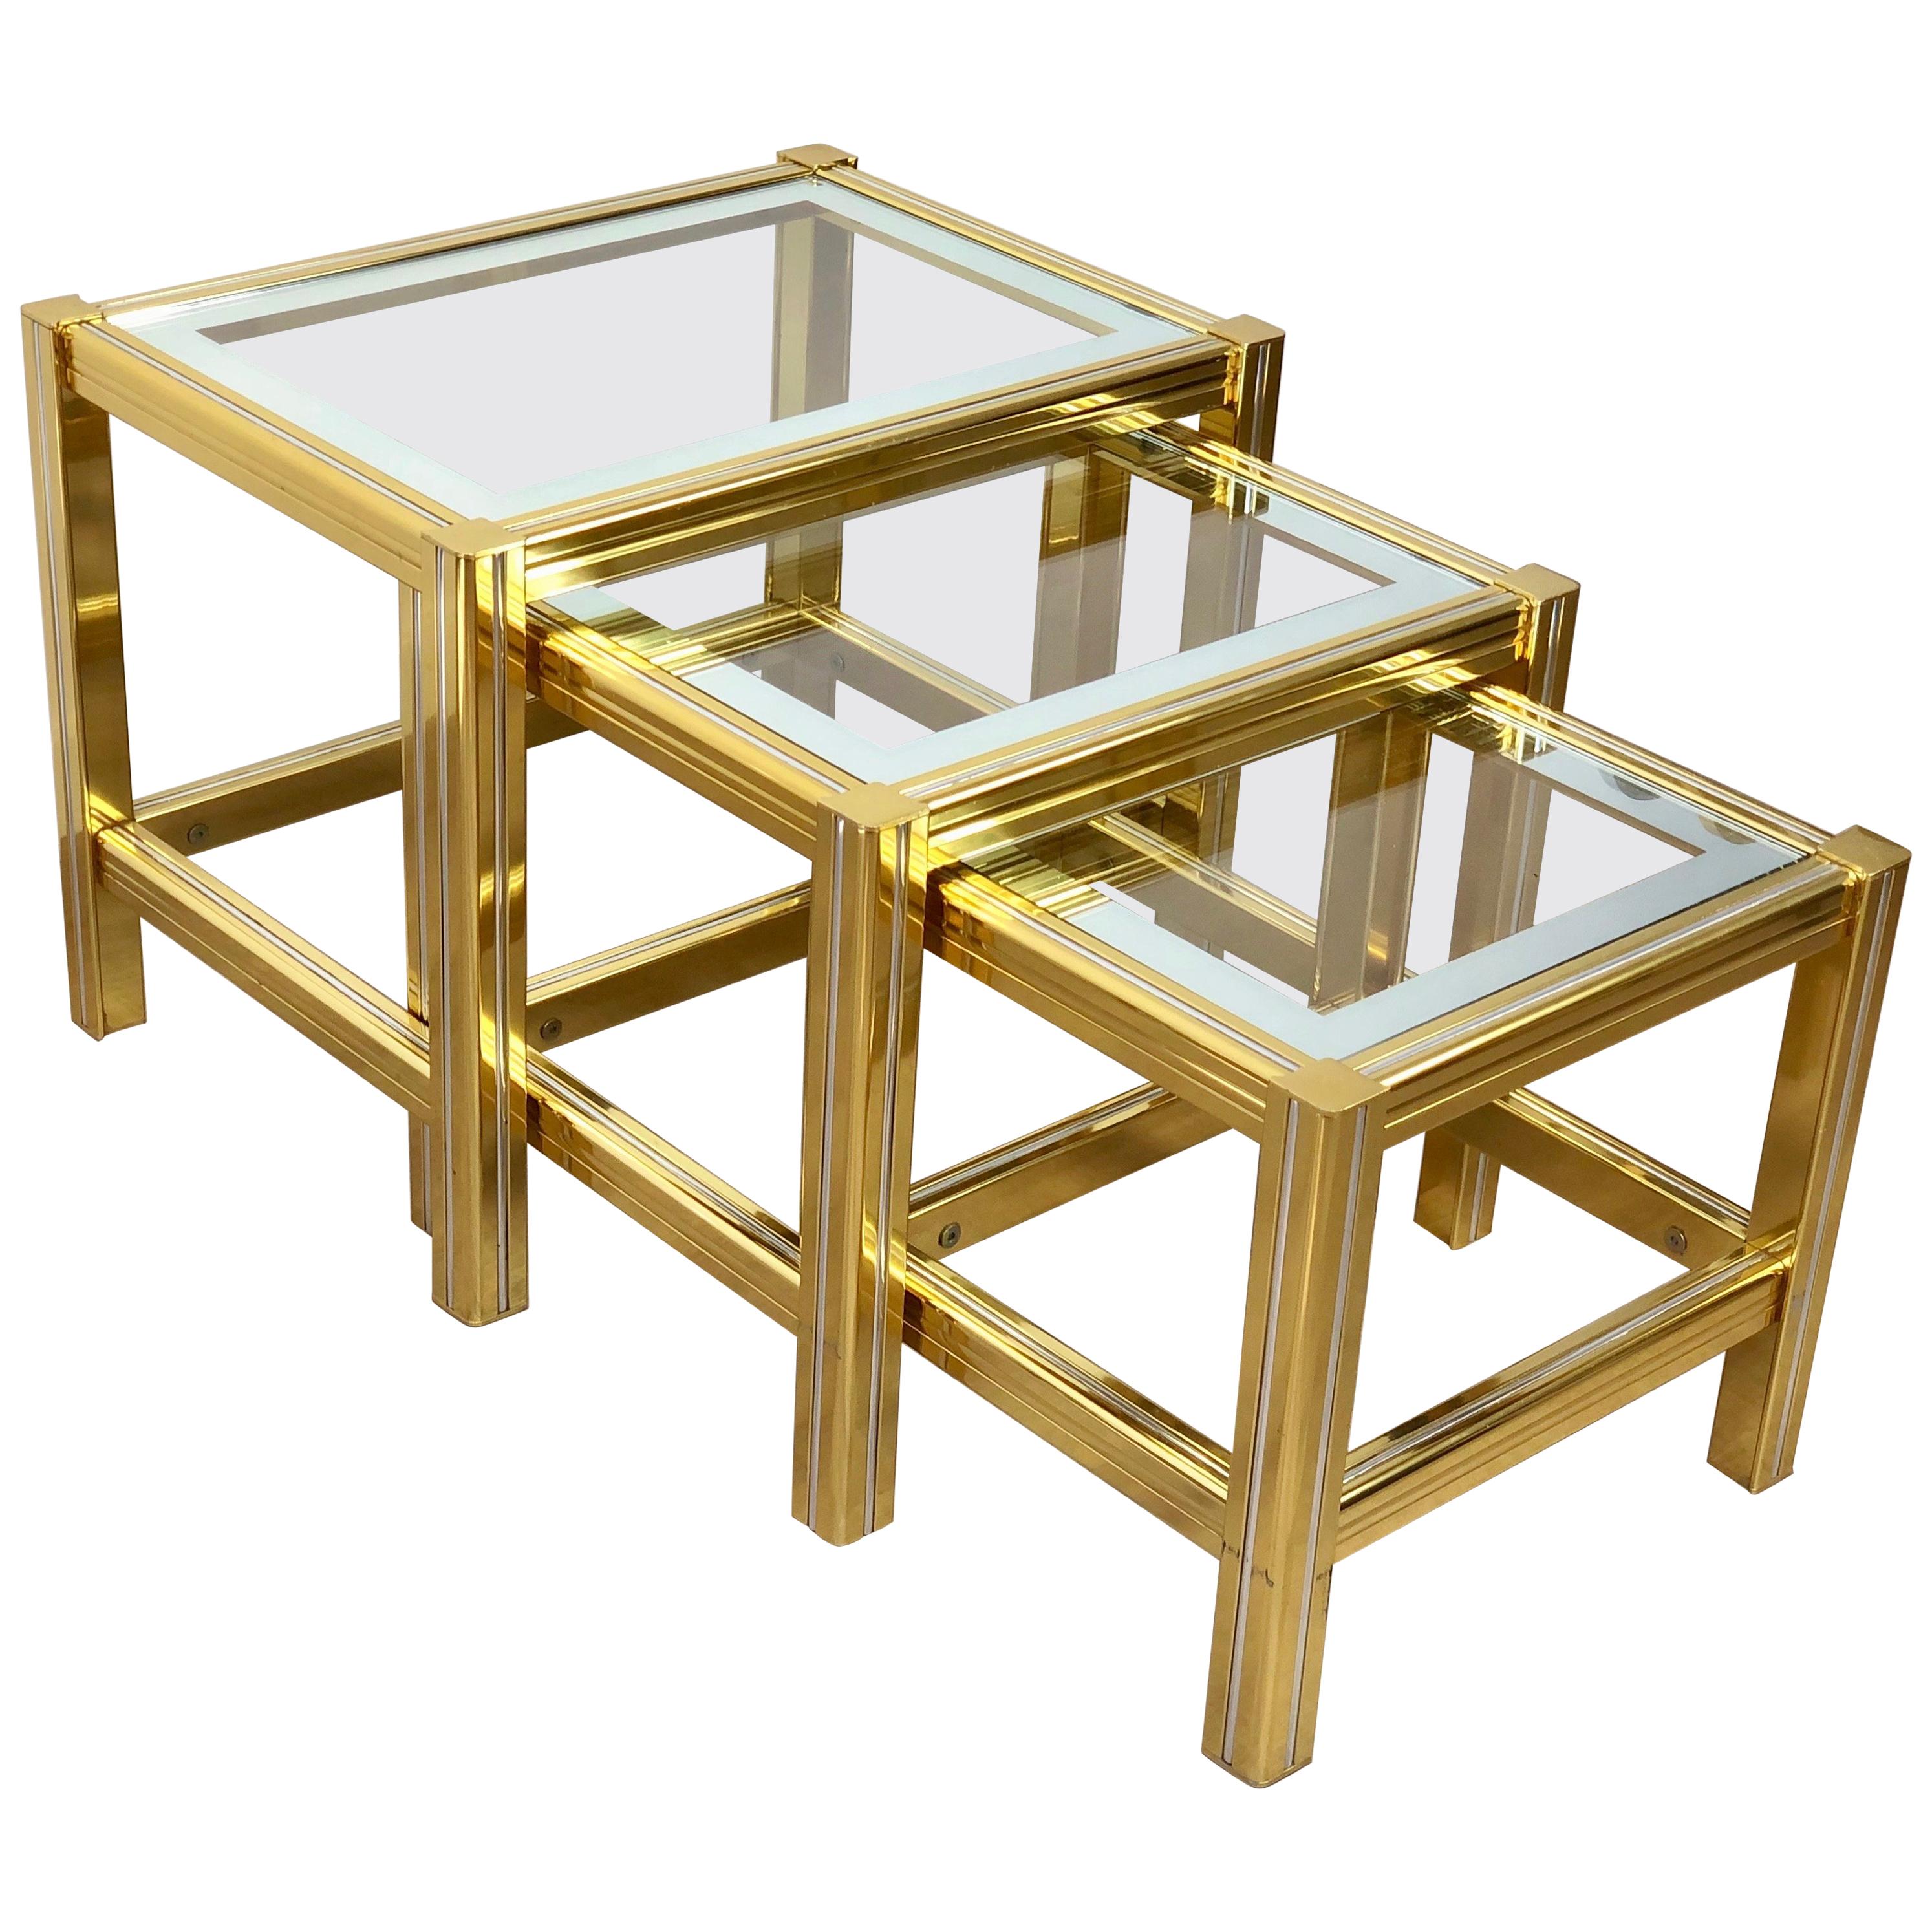 Tris of Increasing Dimensions Side Coffe Table in Brass, Glass and Chrome, 1970s For Sale